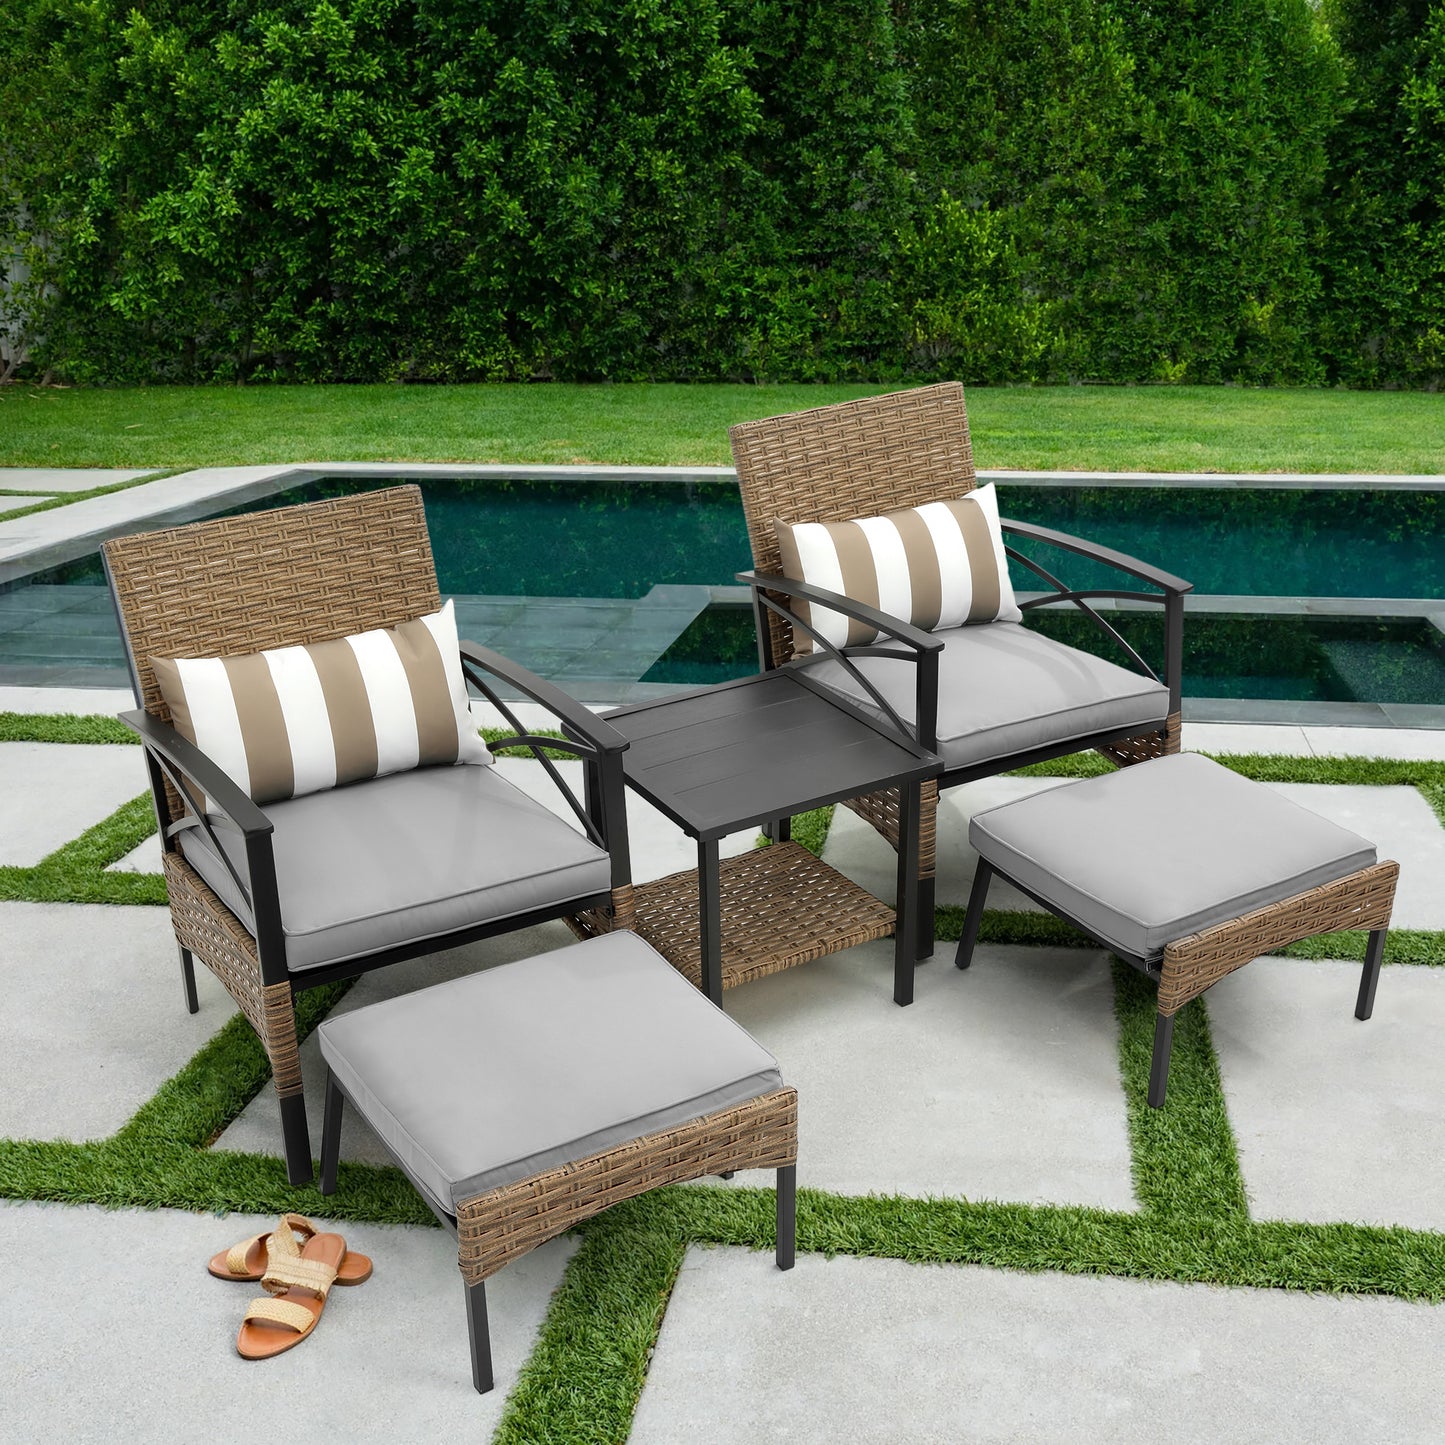 5 PCS Outdoor Rattan Furniture Set, Patio Lounge Chairs with Ottoman Footrest, All Weather Cushioned Outside Sectional Furniture Set for Backyard, Deck, Balcony, Y016